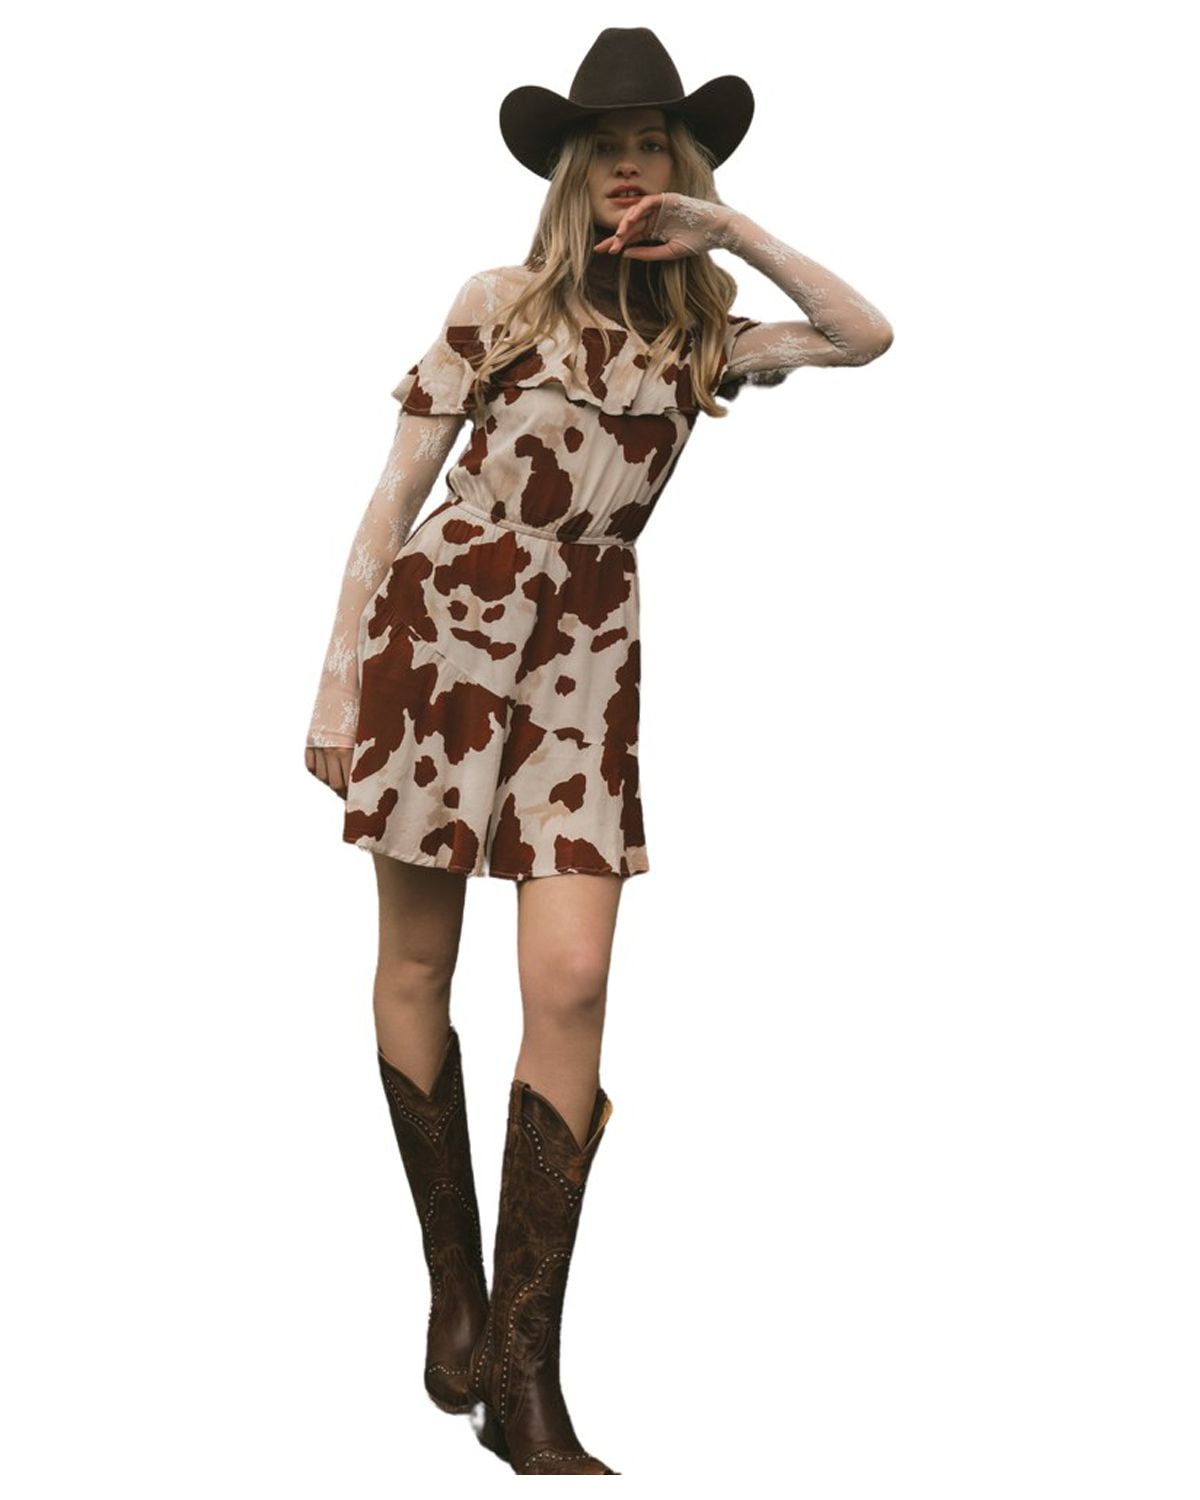 Idyllwind Women's Made For This Off-Shoulder Cow Print Dress